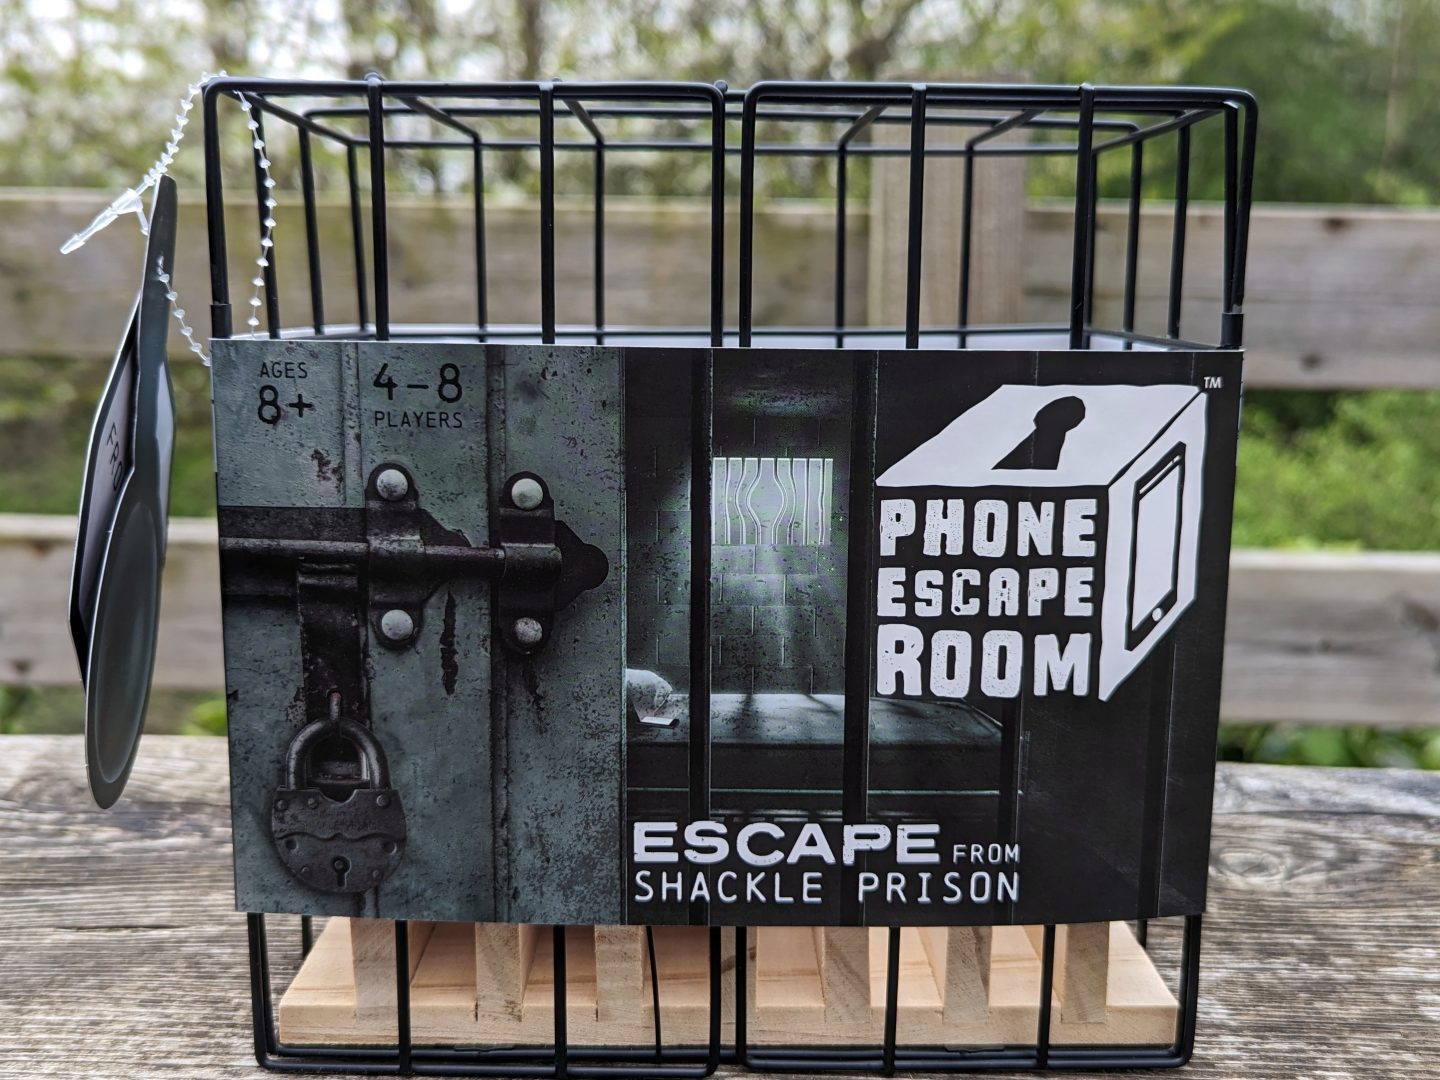 Phone escape room cage with packaging still on - a traditional toy for kids that lets them solve puzzles to get to their electronics